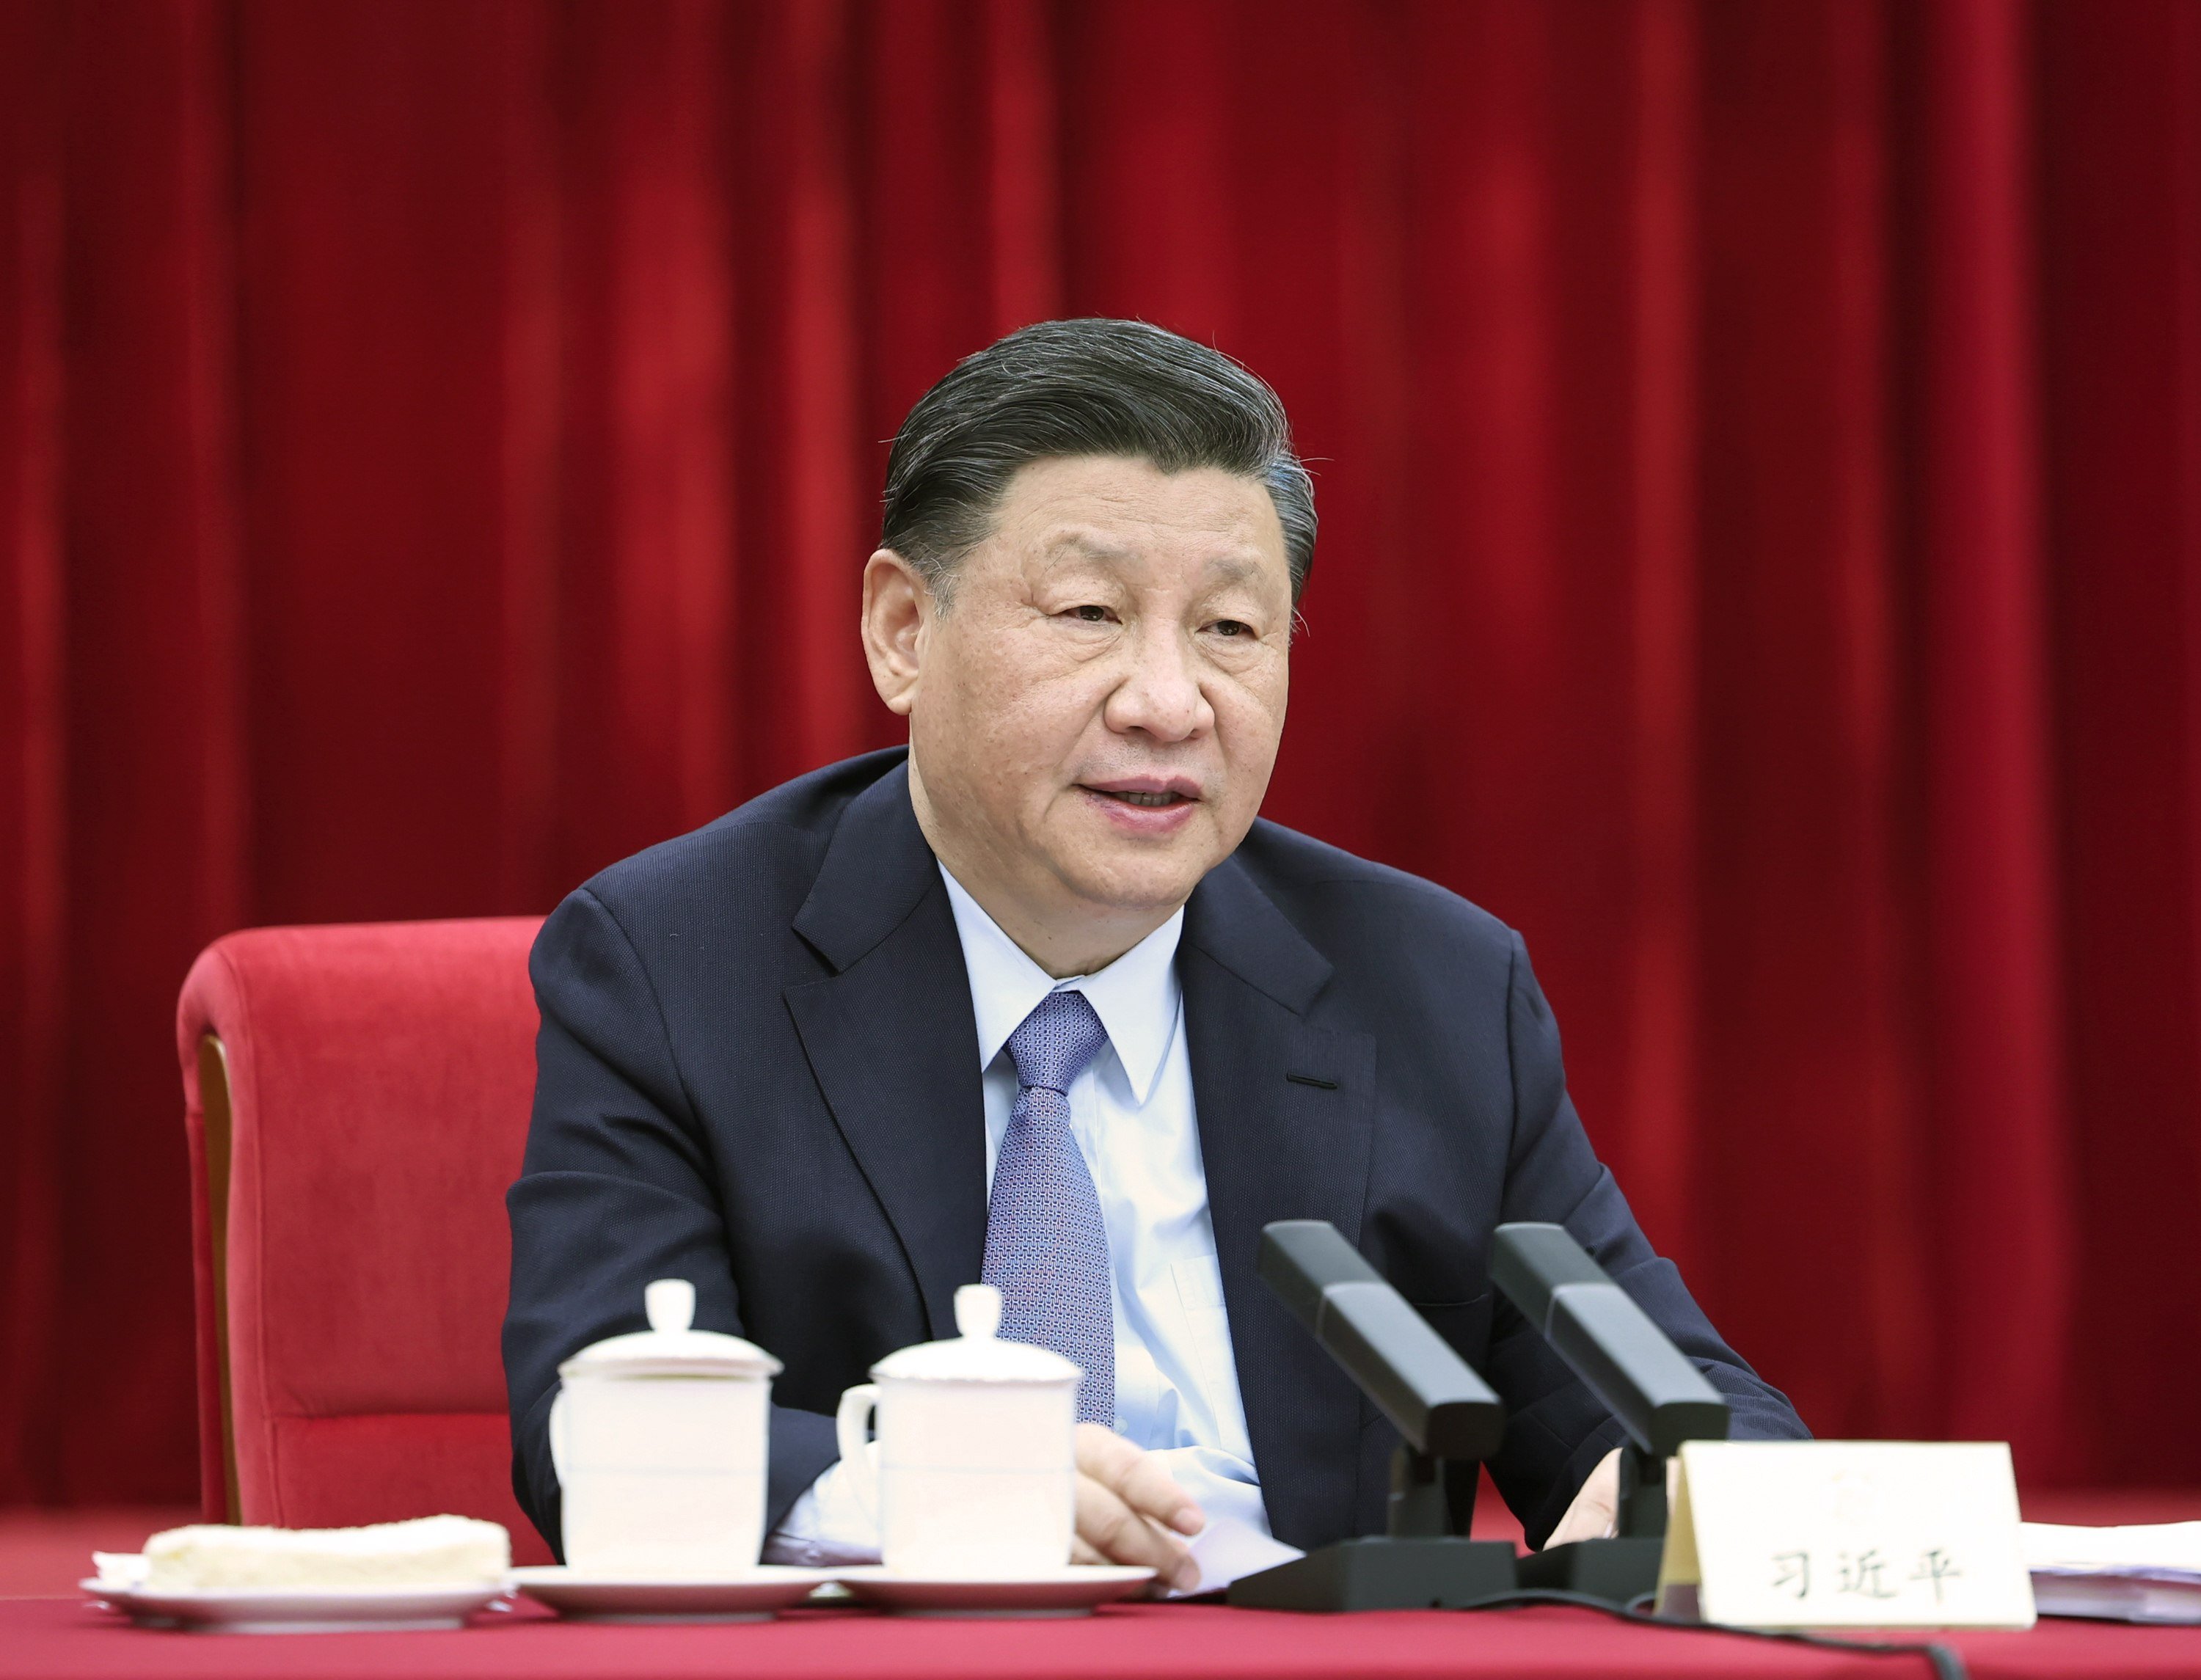 Chinese President Xi Jinping has told “two sessions” sideline events the US is leading Western suppression of Chinese development and China must wean itself from relying on the US. Photo: EPA-EFE/Xinhua